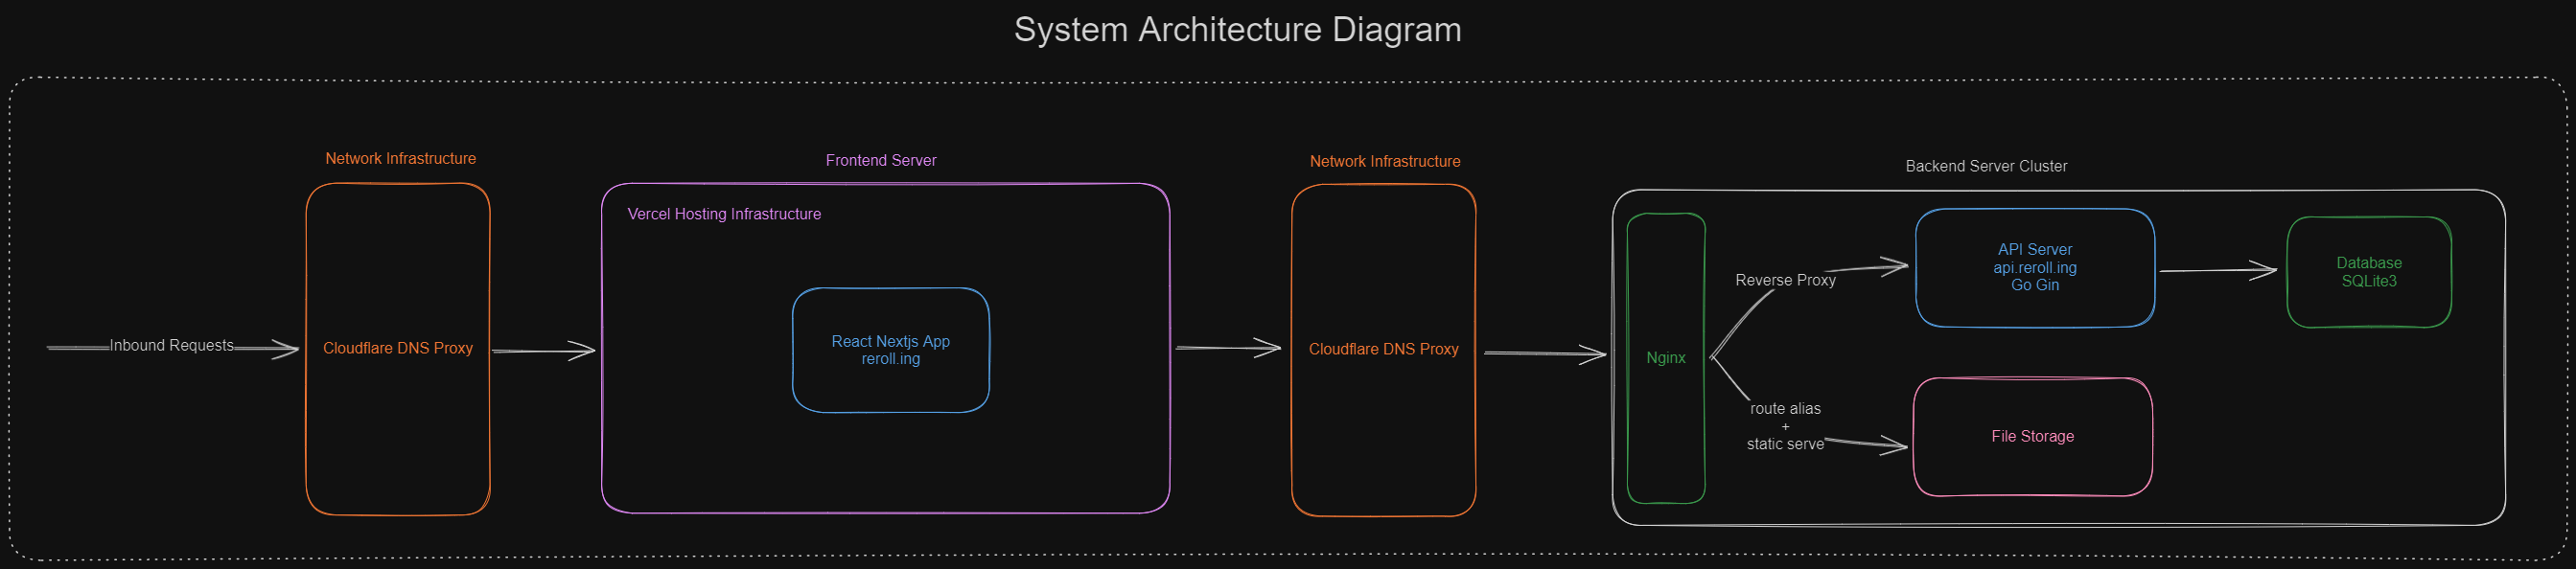 system-architecture